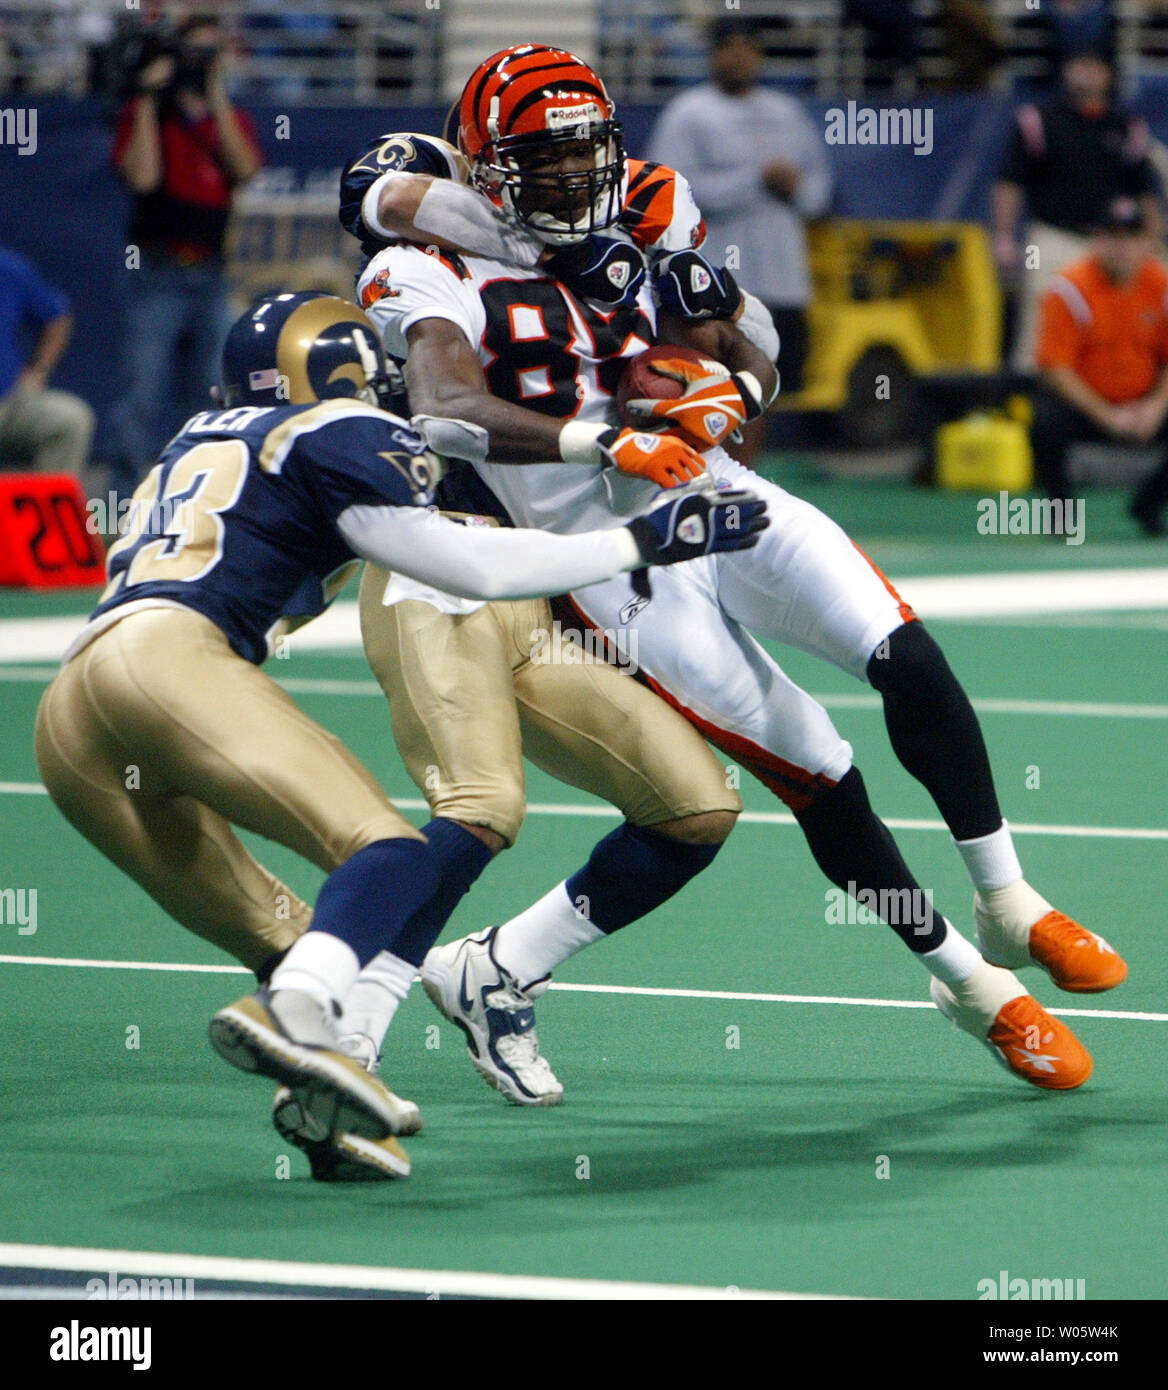 St. Louis Rams' Jerametrius Butler (L) and Aeneas Williams, corral Cincinnati Bengals' Tony Stewart for the tackle in the second quarter at the Edward Jones Dome in St. Louis on December 21, 2003. (UPI Photo/Bill Greenblatt) Stock Photo